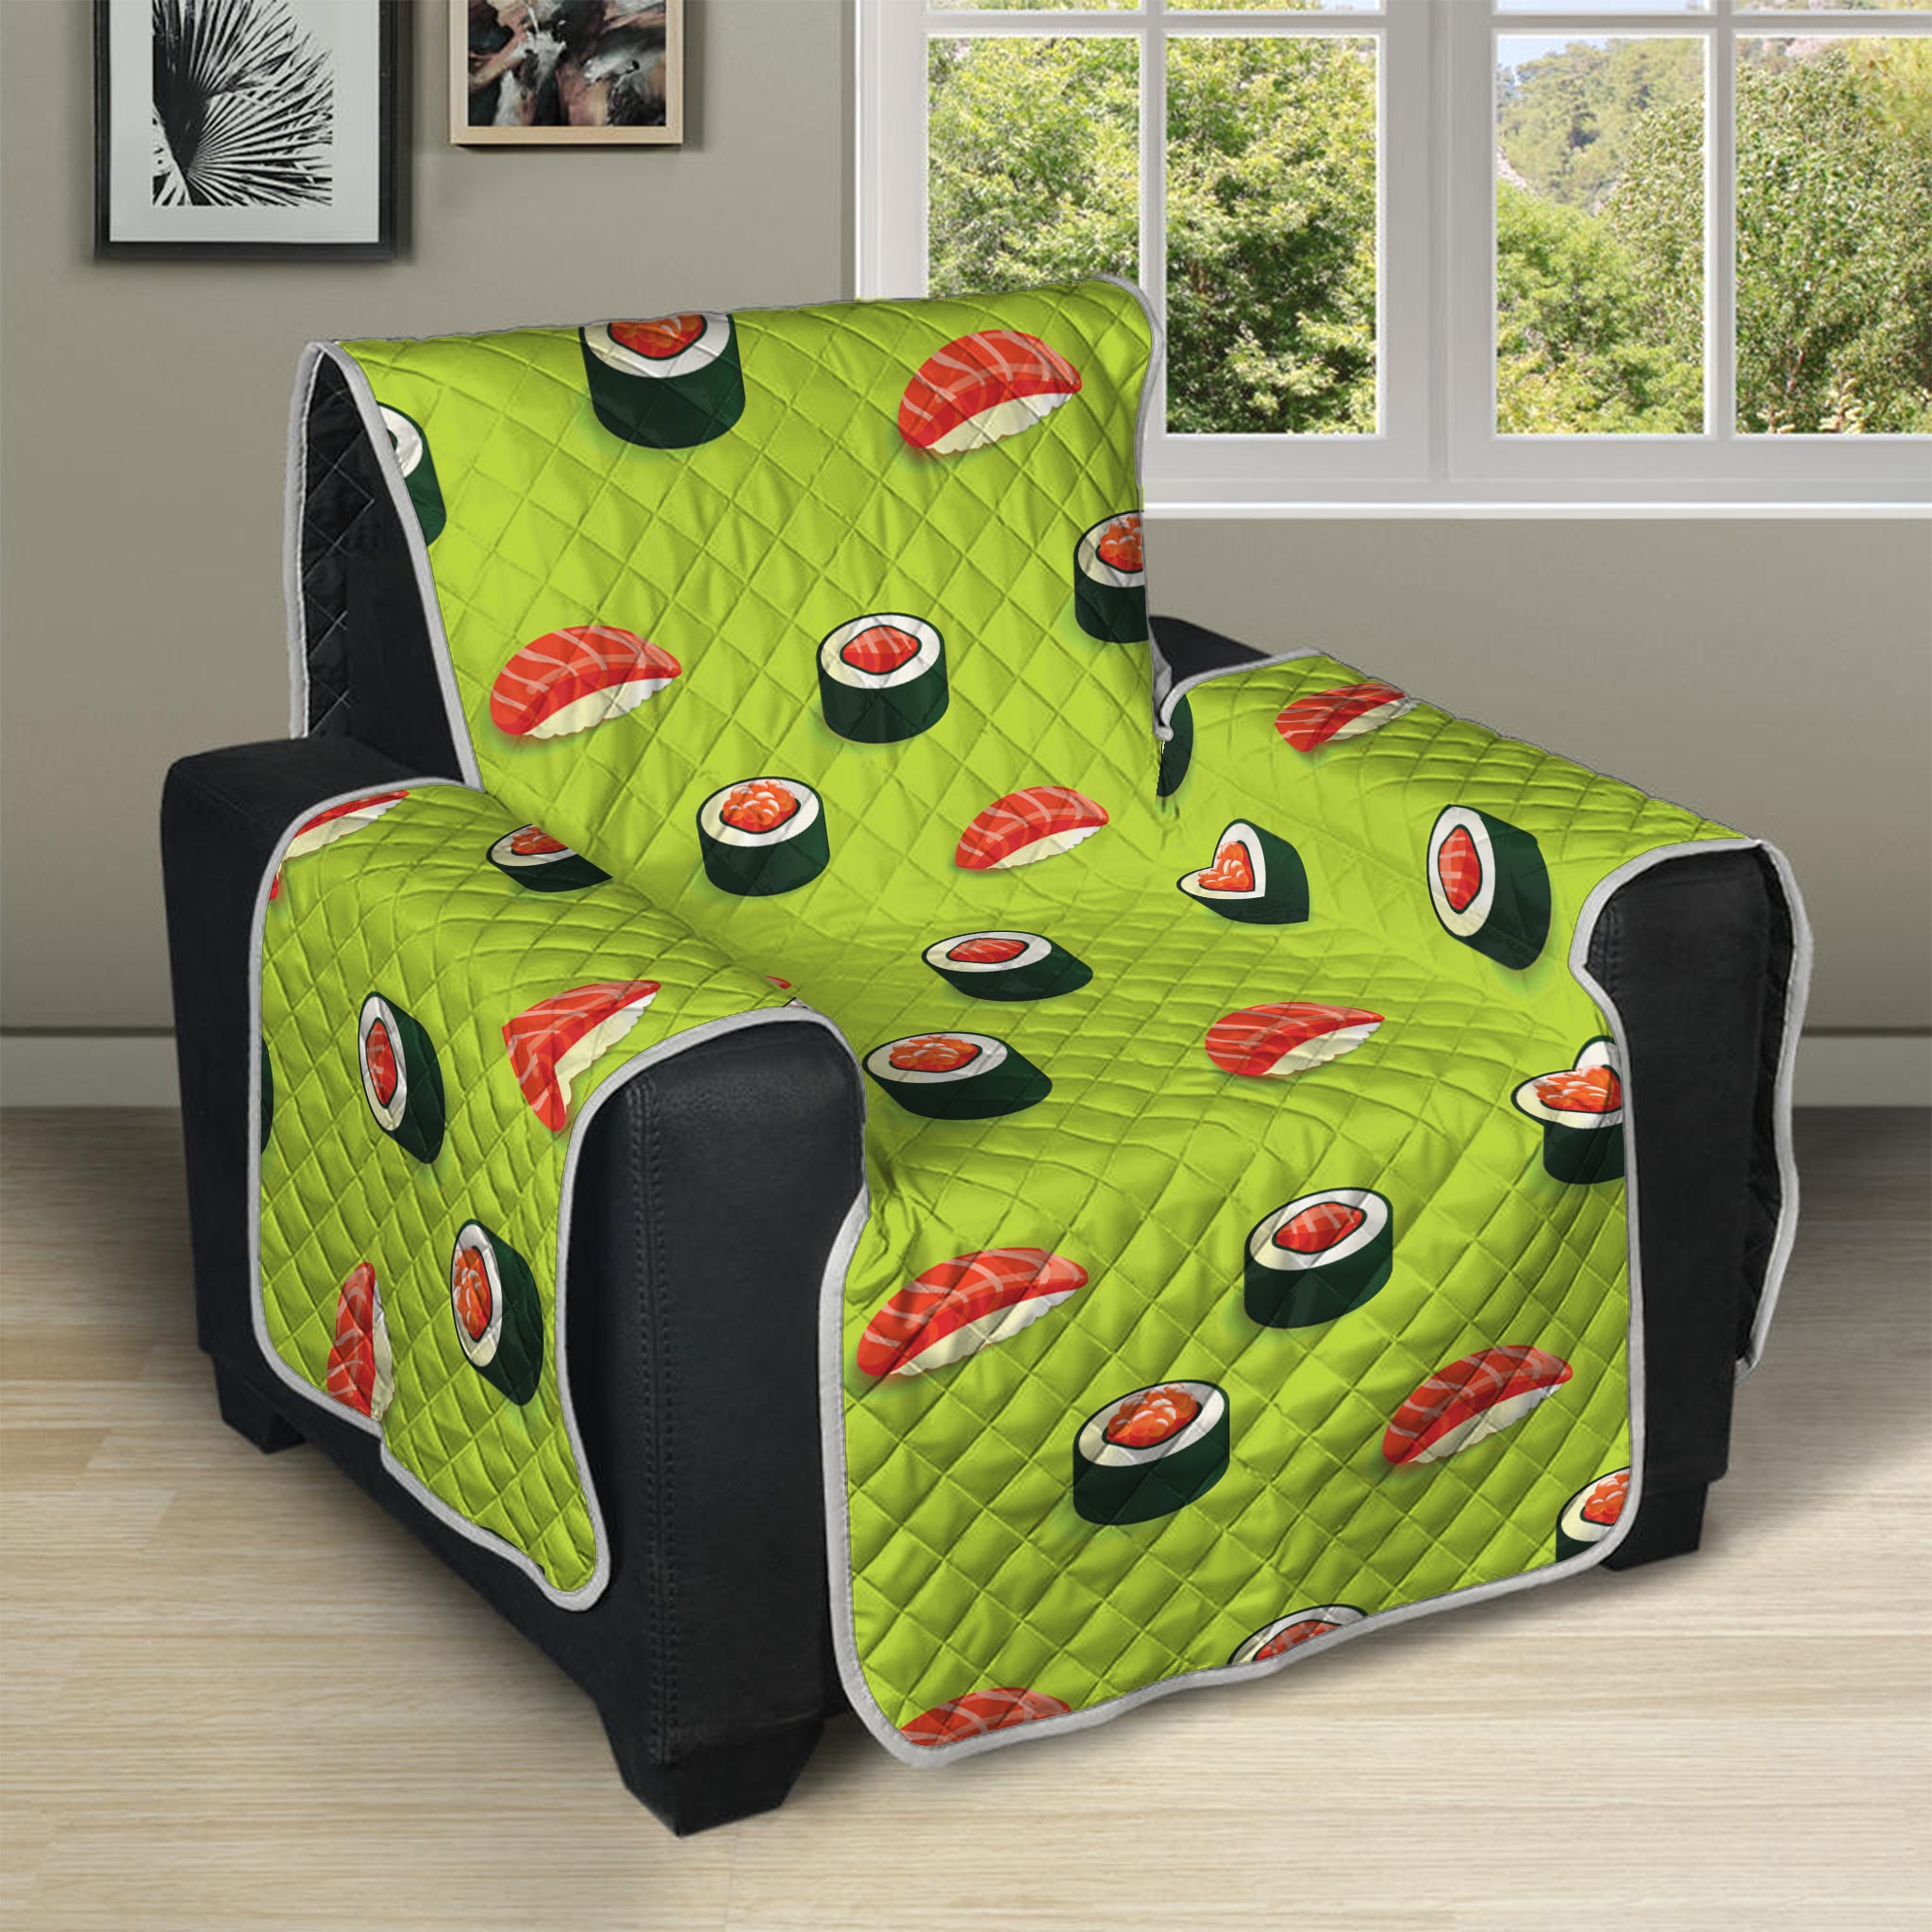 Salmon Sushi And Rolls Pattern Print Recliner Protector